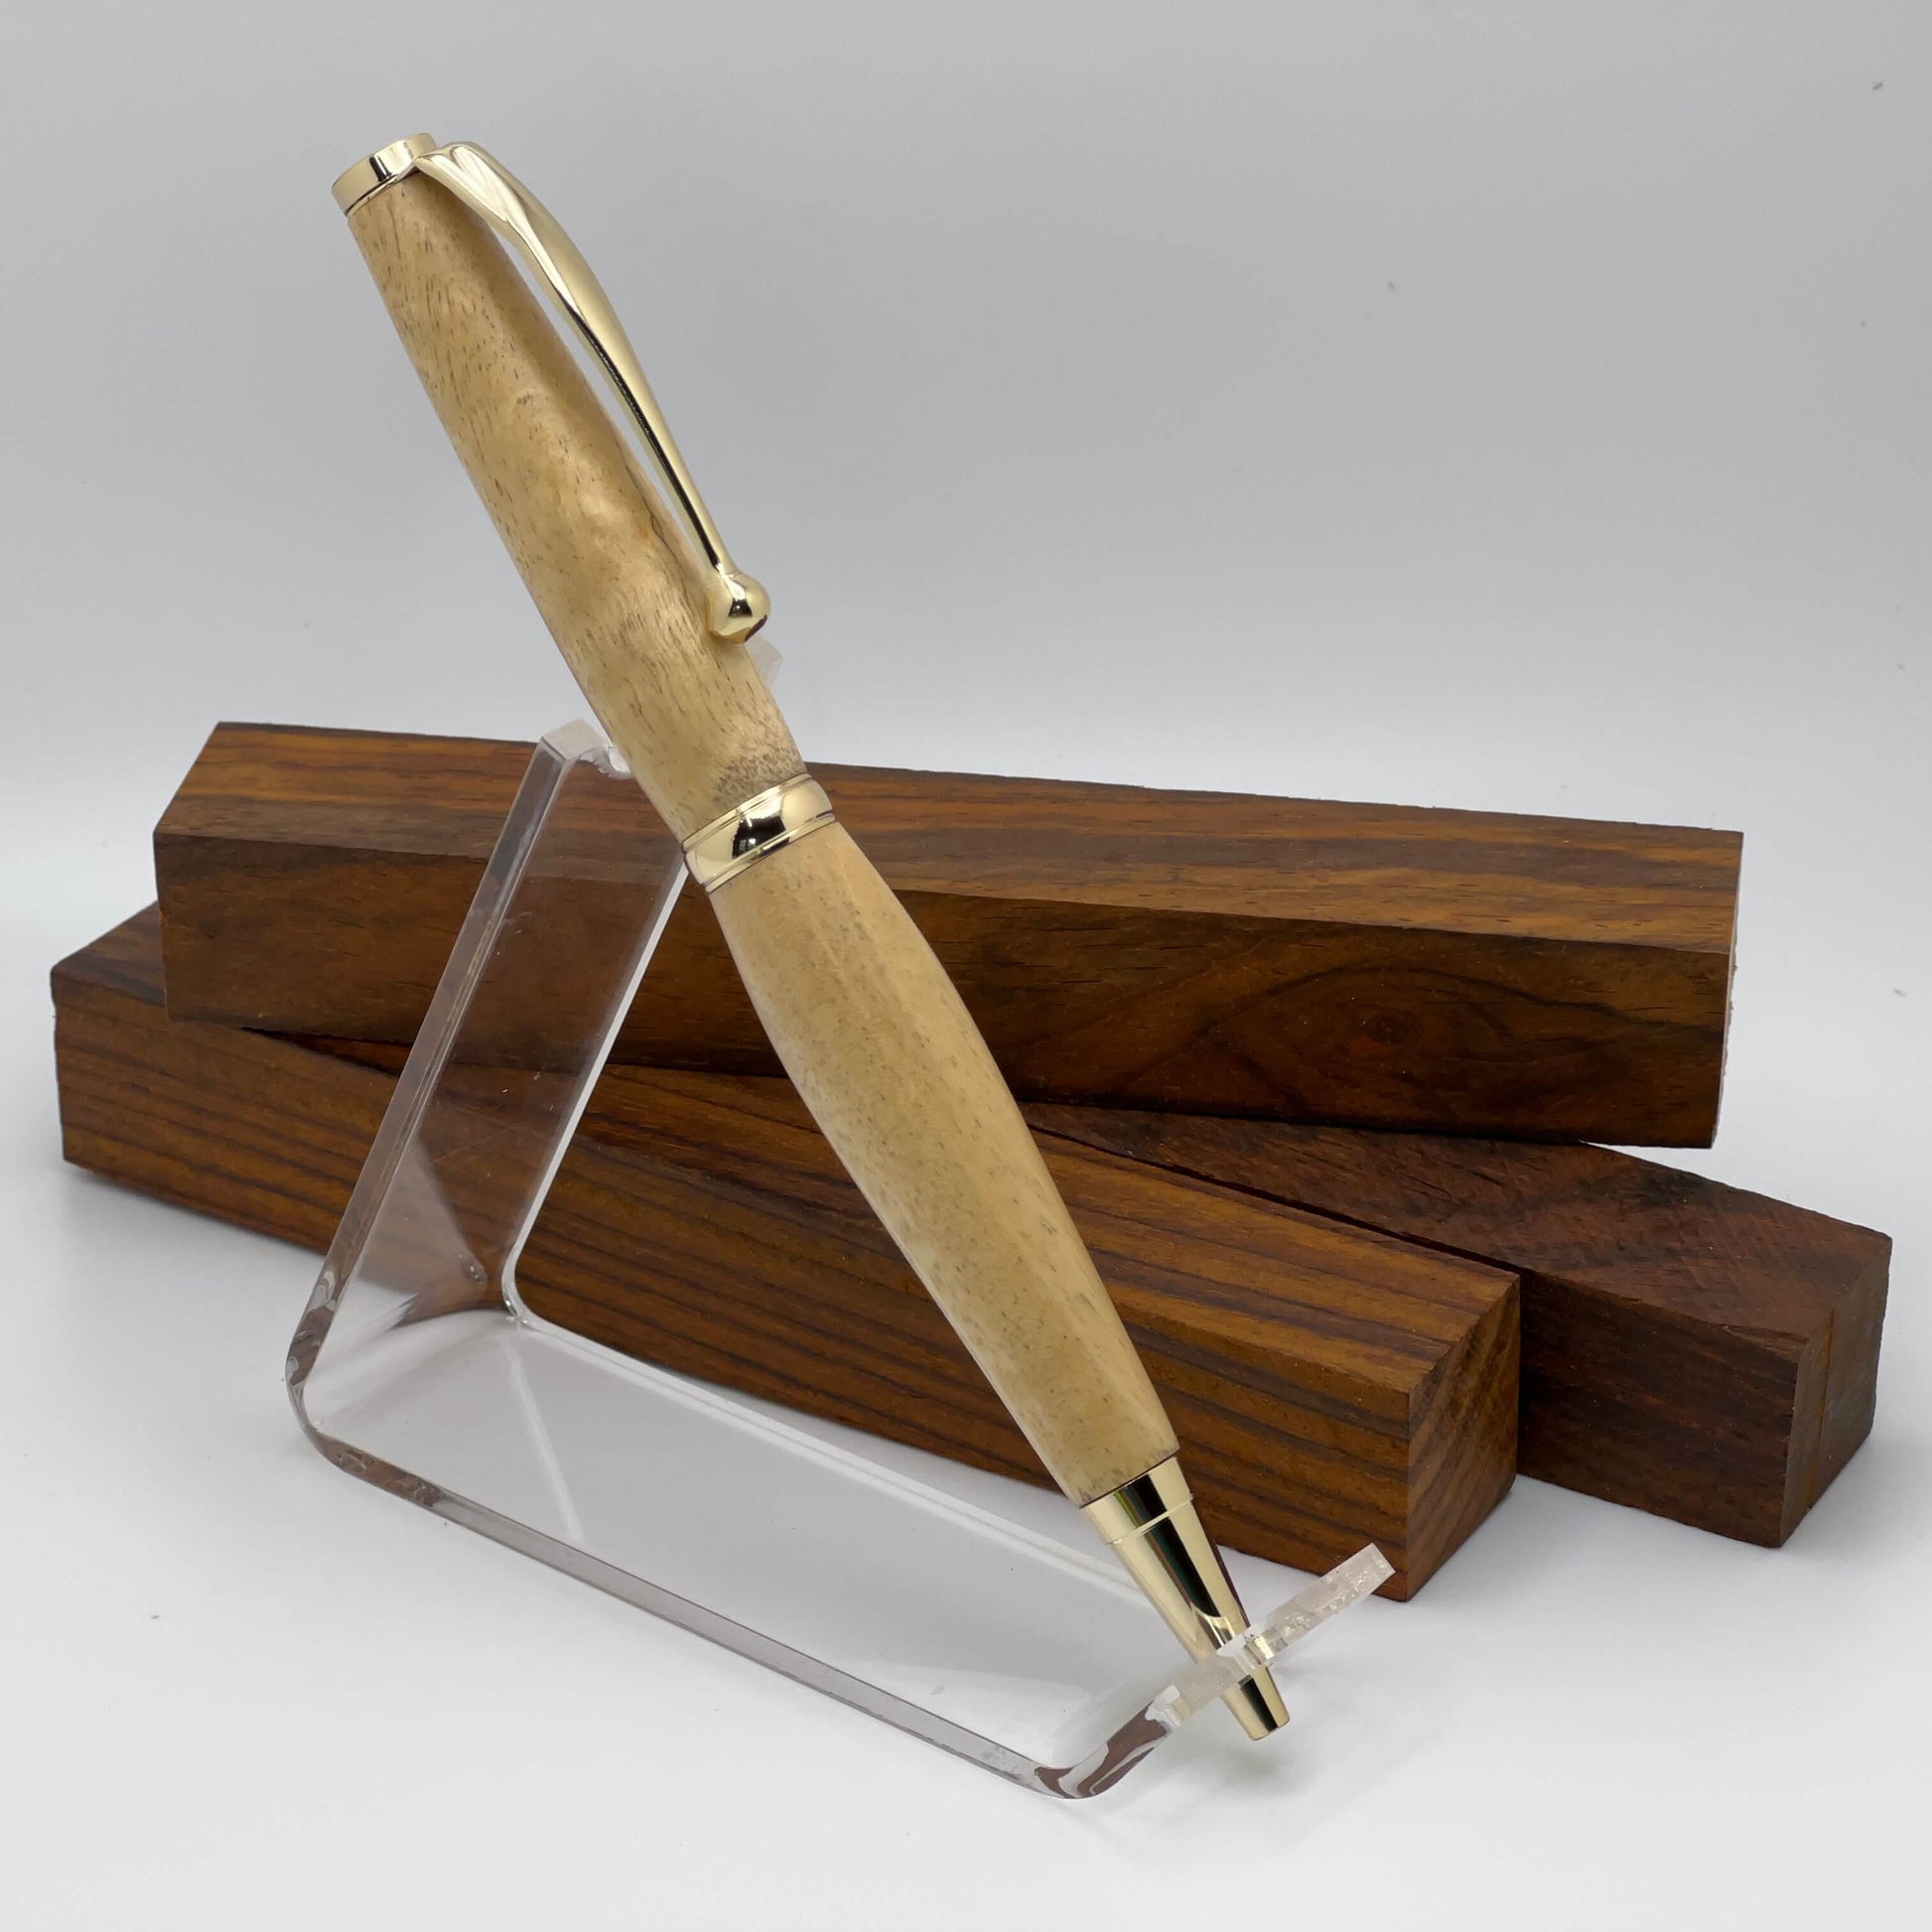 Handcrafted Wood Apple wood pen with gold hardware